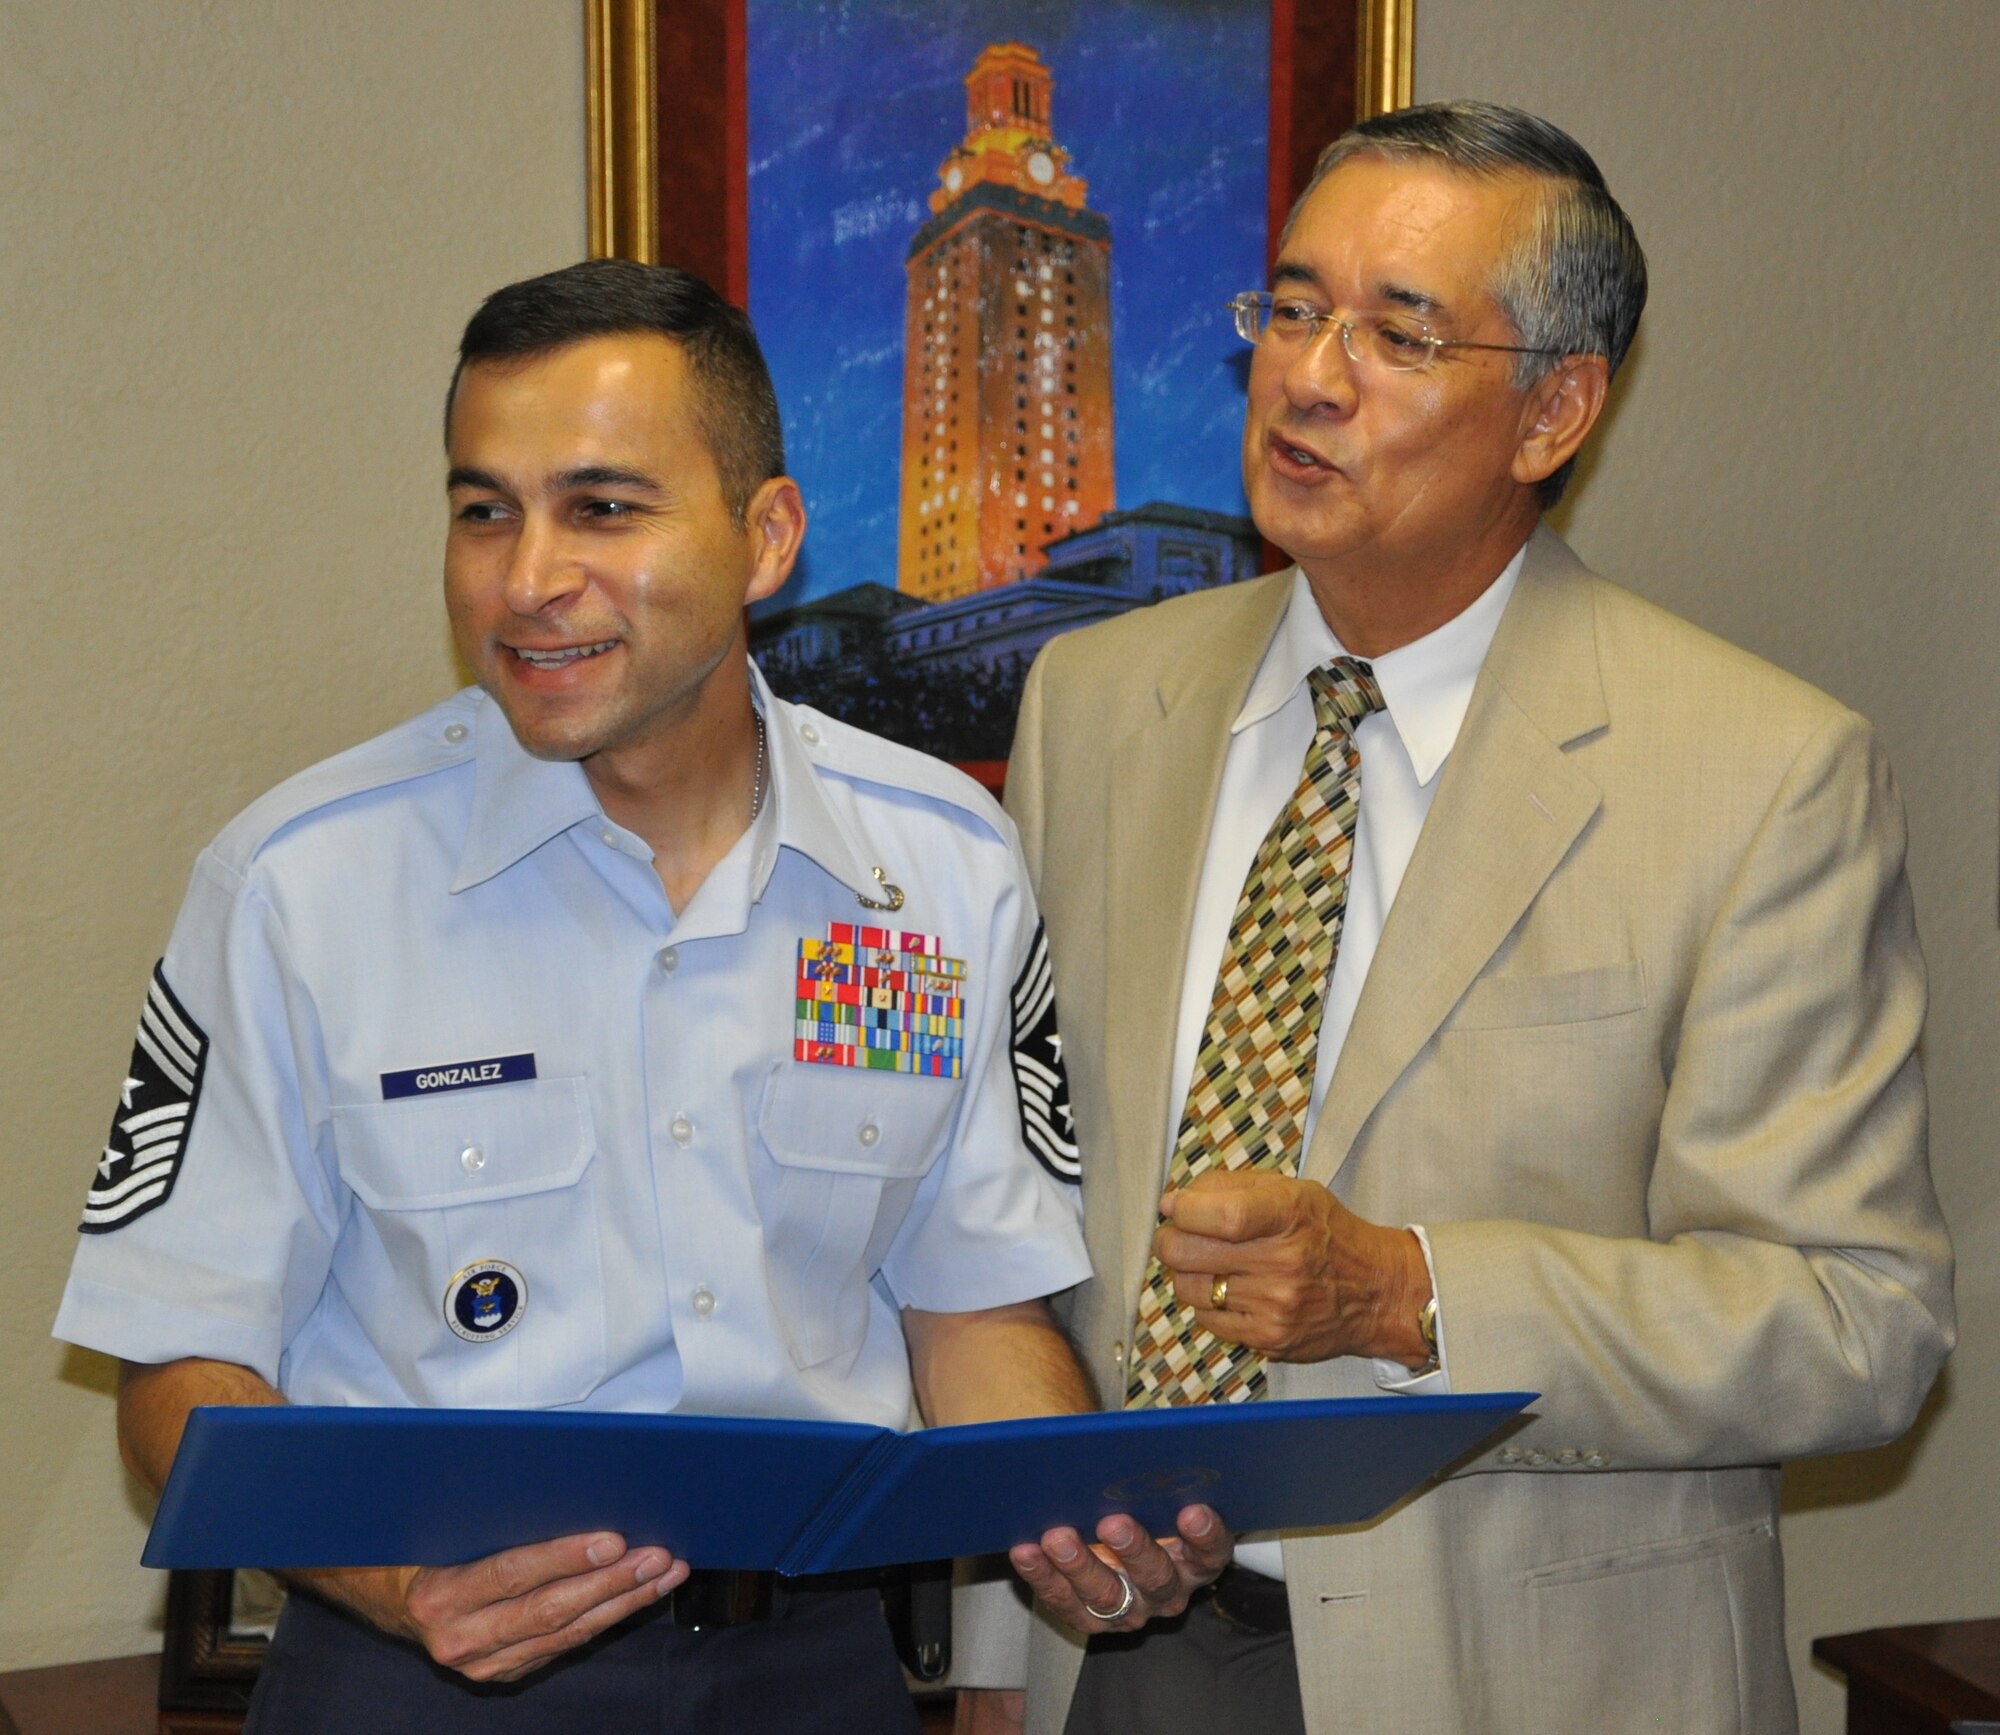 LAUGHLIN AIR FORCE BASE, Texas – Command Chief Master Sgt. Ruben Gonzalez, Air Force Recruiting Service command chief, meets with Del Rio mayor Bobby Fernandez Aug. 19. Chief Gonzalez, who is from Eagle Pass and was recruited into the Air Force out of Del Rio in 1985, chose to begin his world-wide tour of AF recruiting stations with Del Rio. (U.S. Air Force photo by Airman 1st Class Blake Mize)